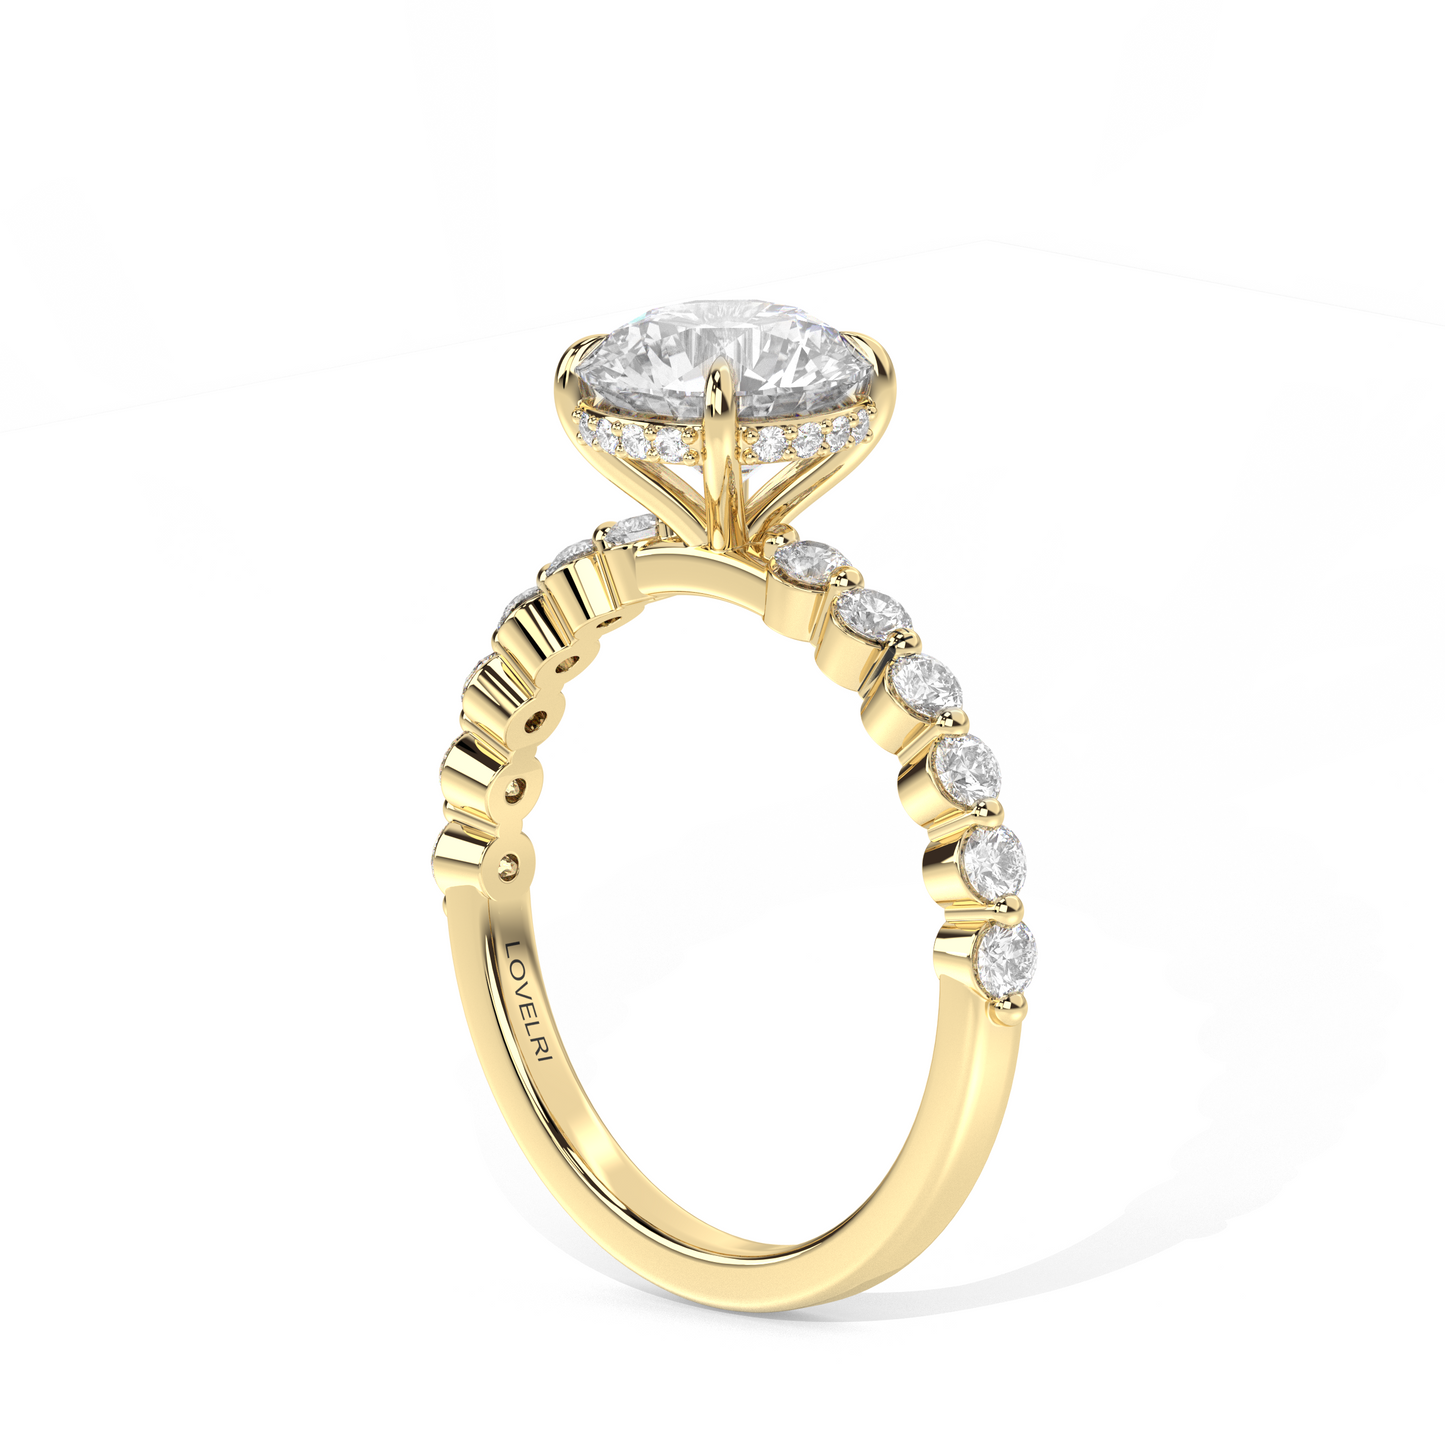 Face Up View - Scalloped Band Round Engagement Ring Yellow Gold